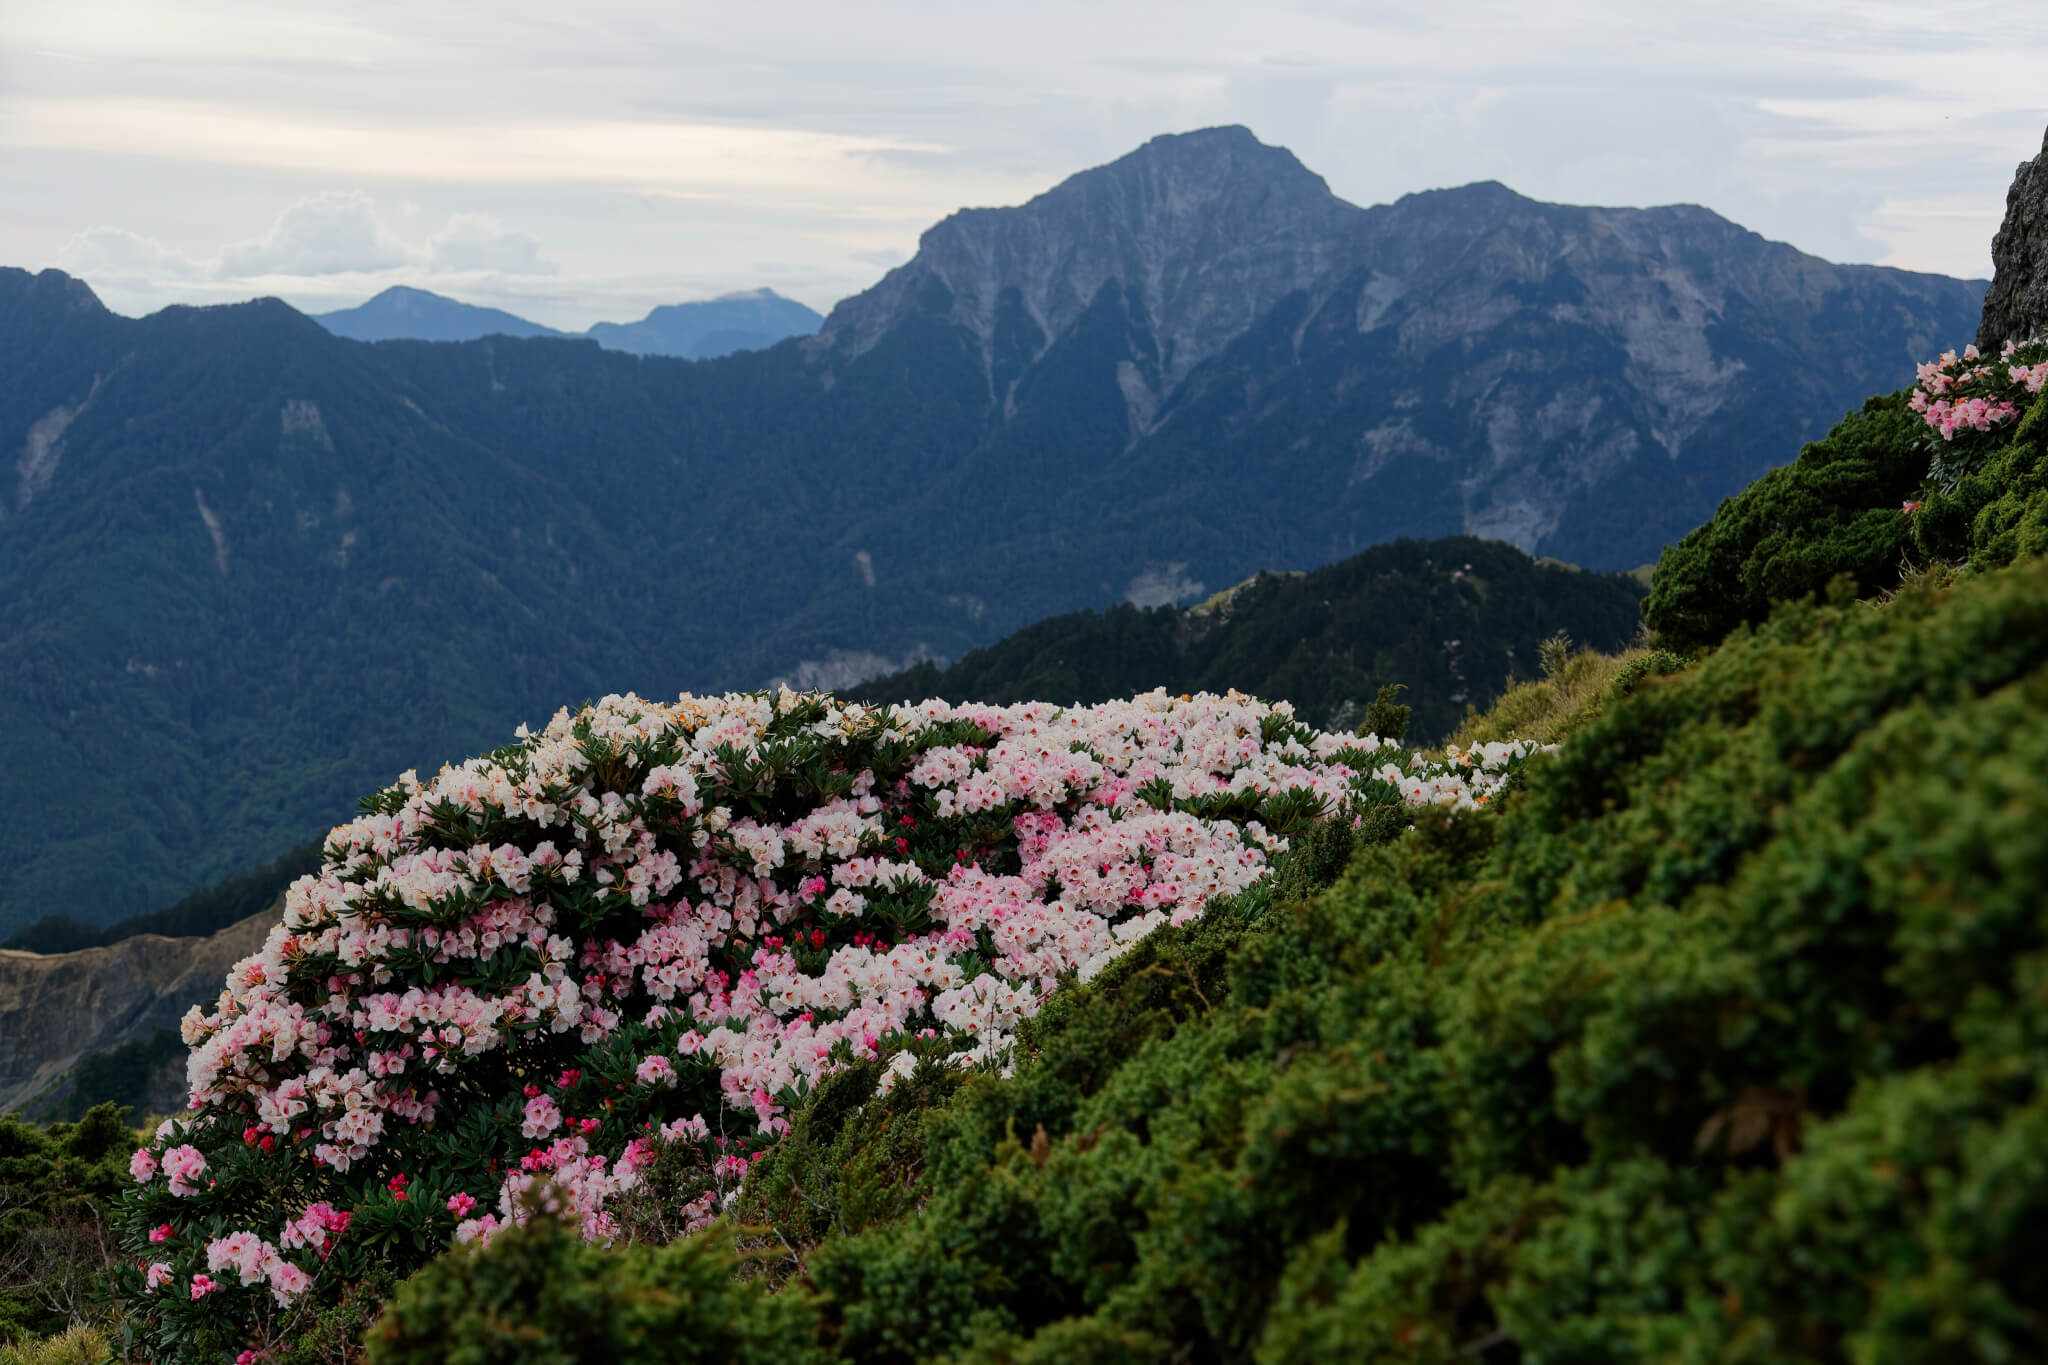 Scenery,Of,Pink,Alpine,Azalea,(rhododendron),Bushes,Blooming,On,The